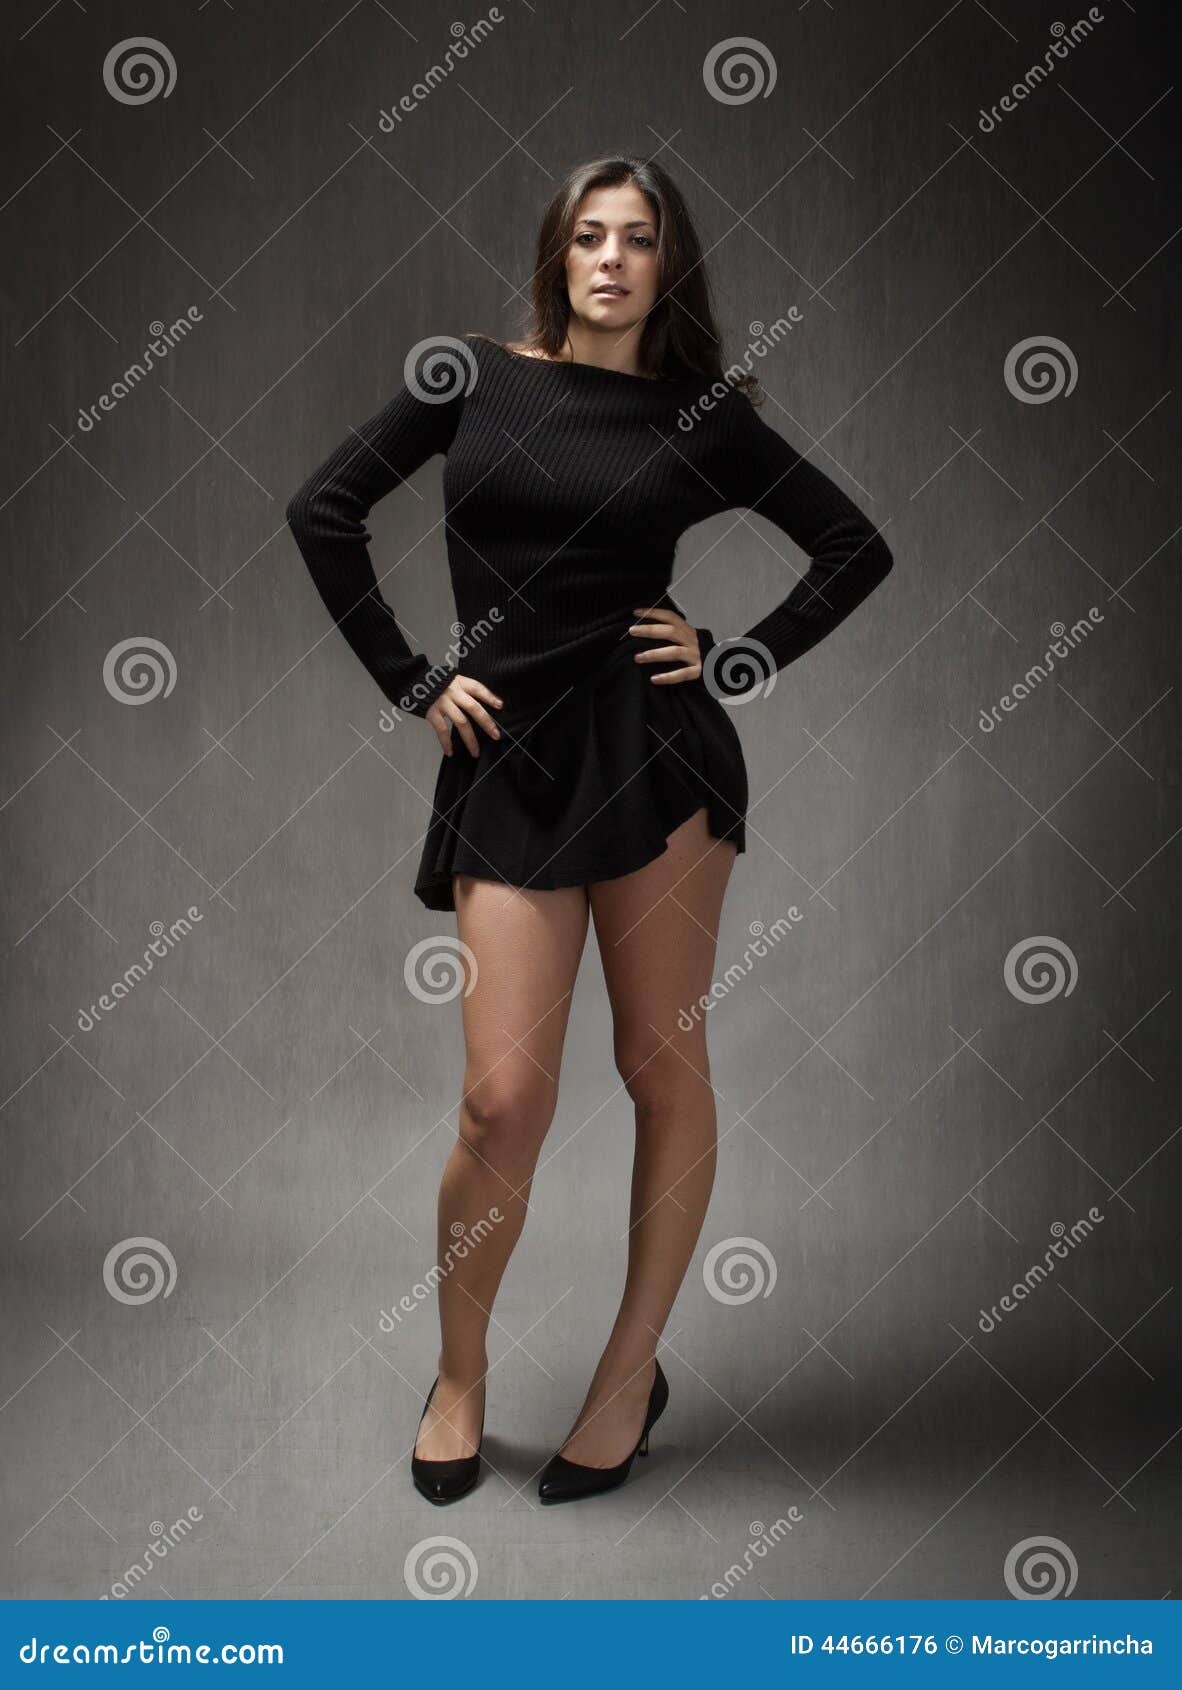 Model in a Fashion Standing Pose Stock Photo - Image of background,  portrait: 44666176